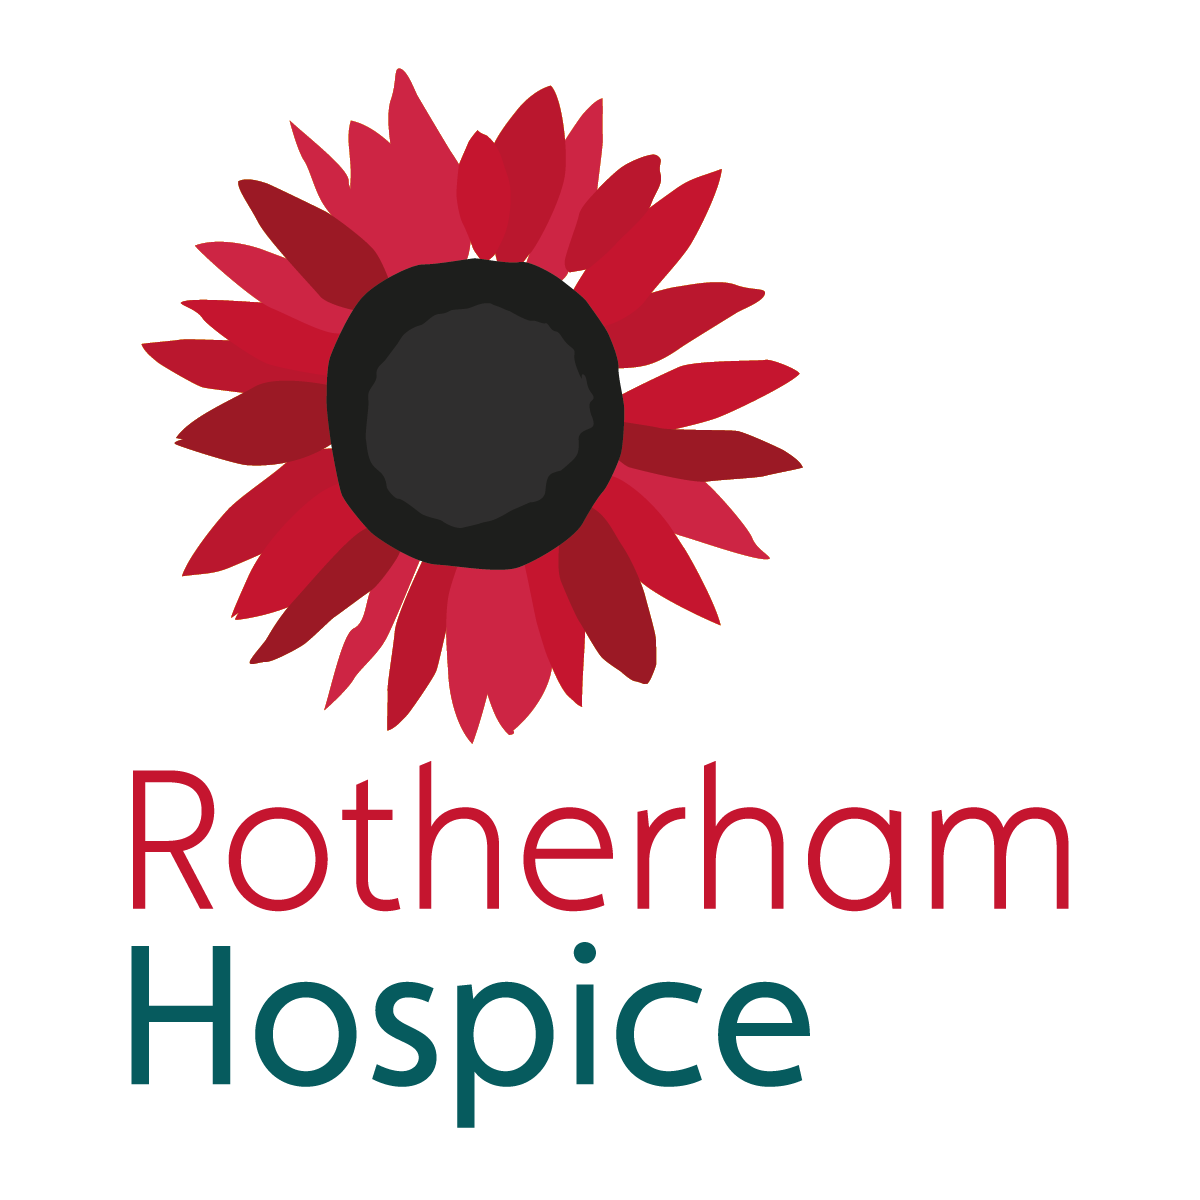 The Rotherham Hospice Trust